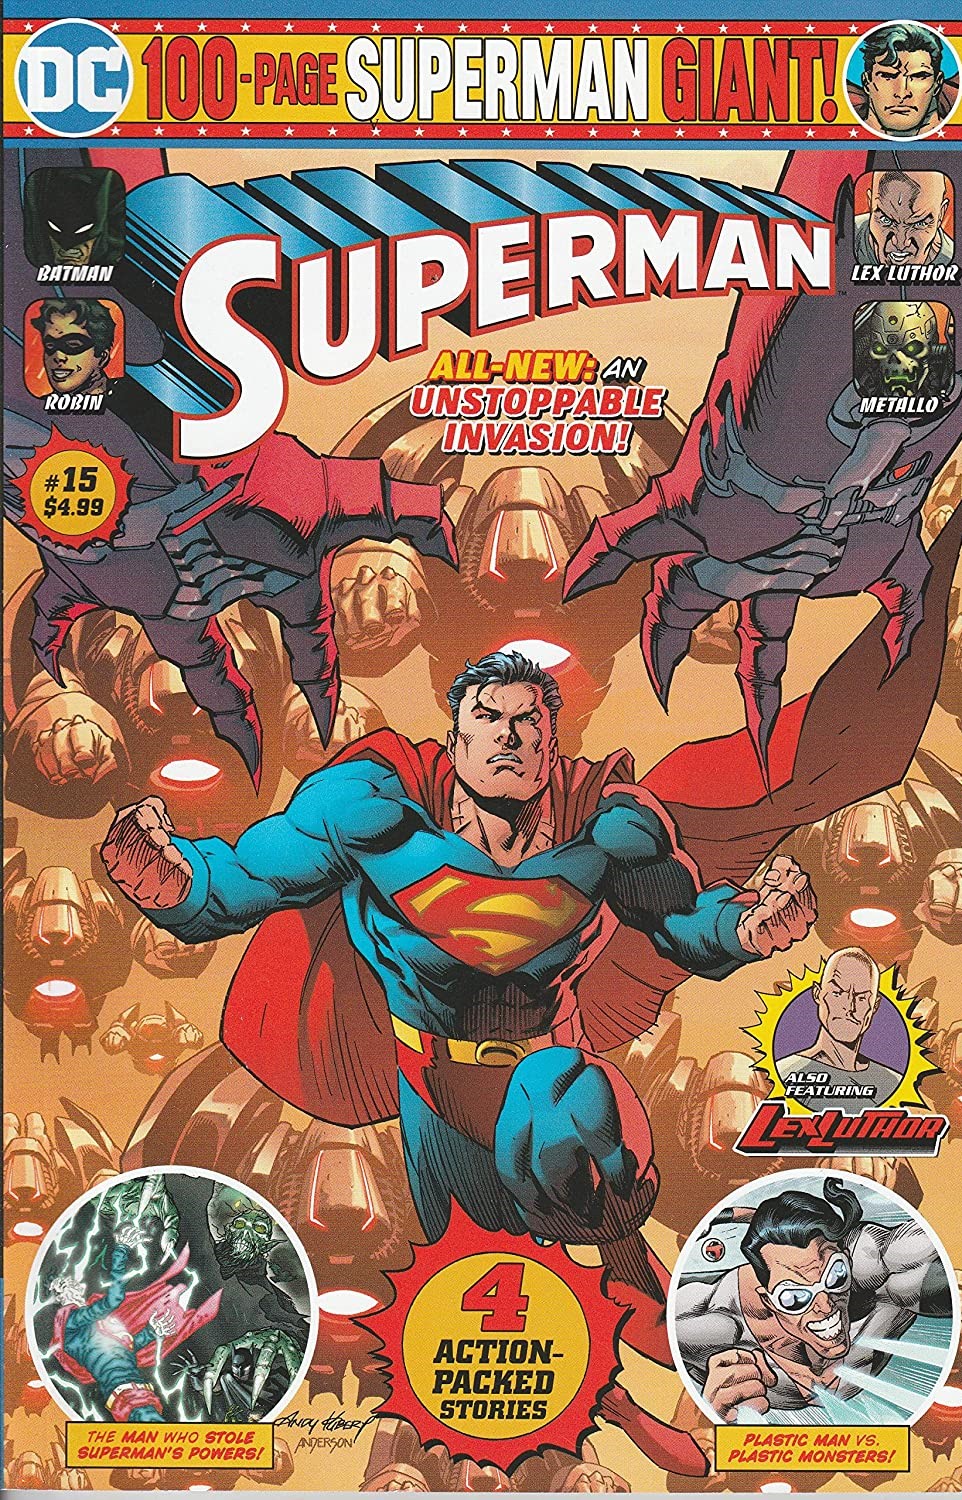 Son of Superman 100 Page Giant #1 DC 2011 VF/NM Comics Book 